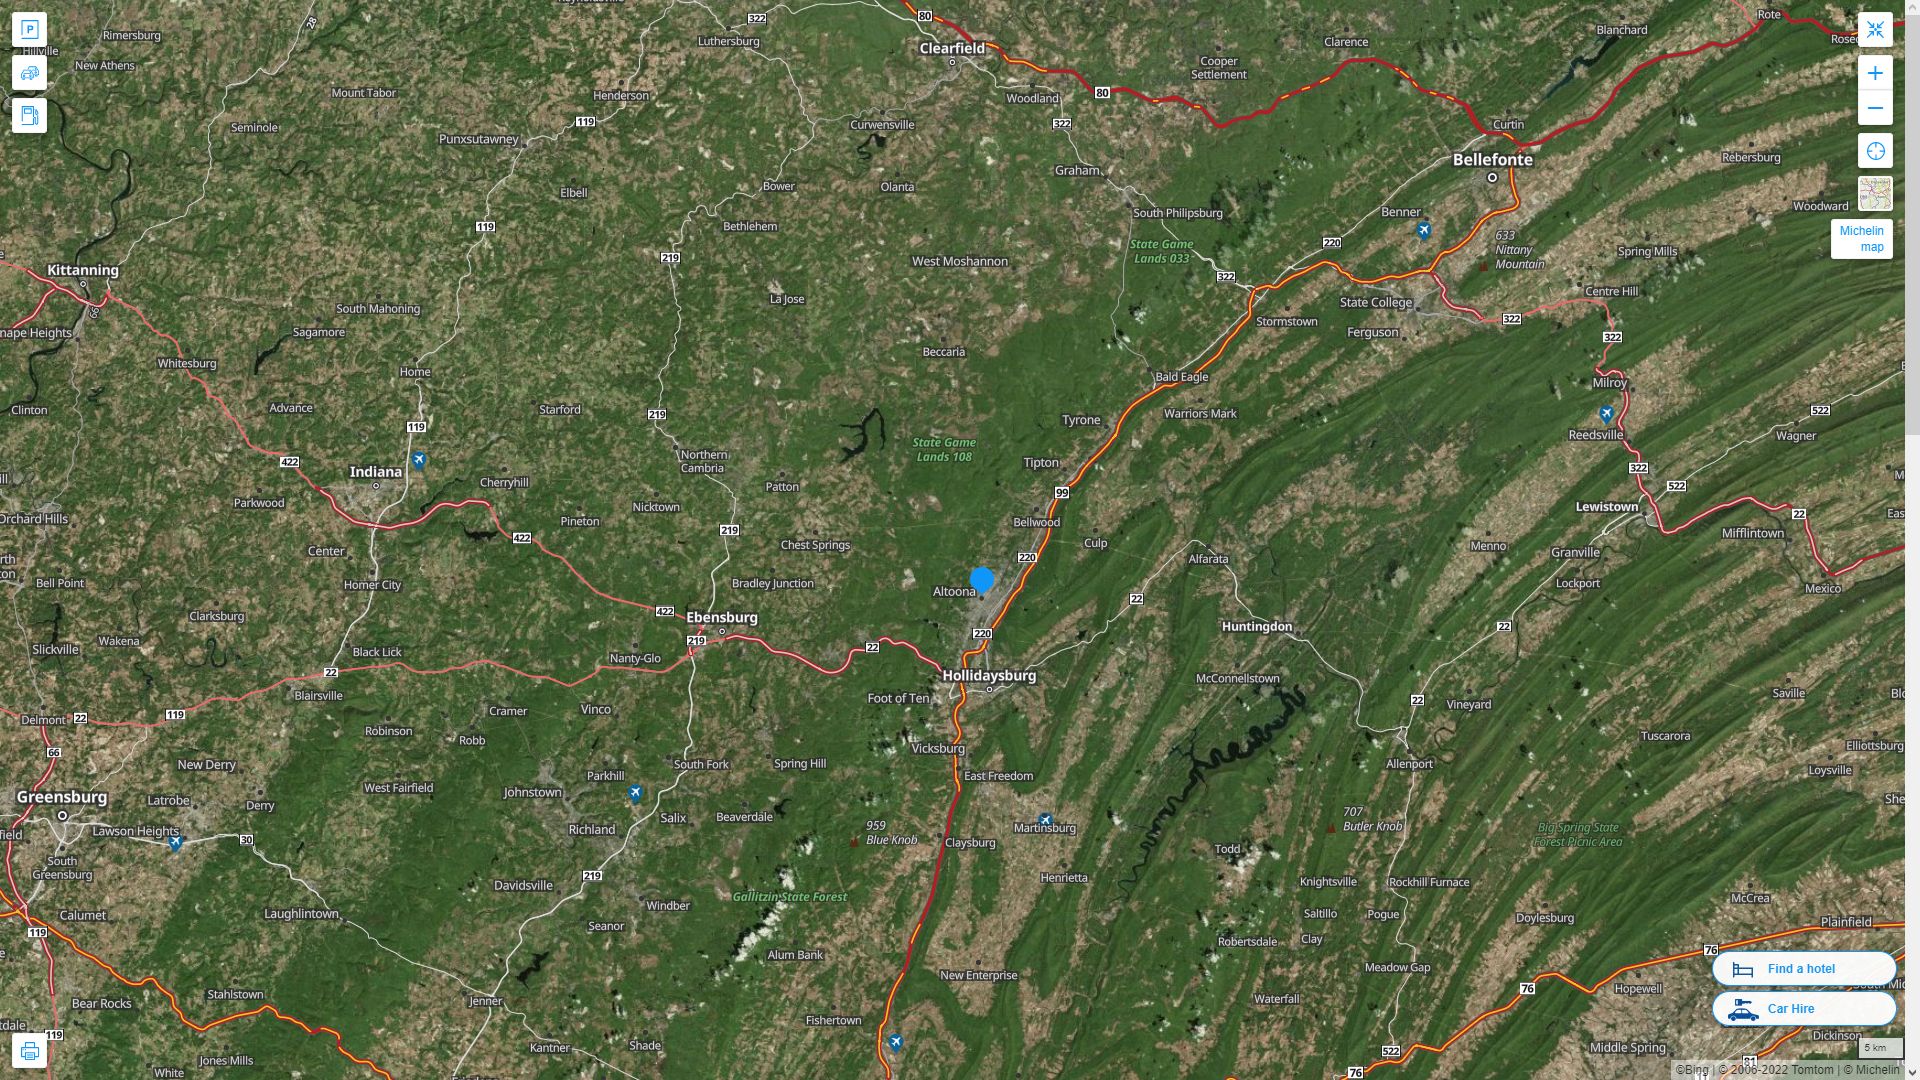 Altoona Pennsylvania Highway and Road Map with Satellite View